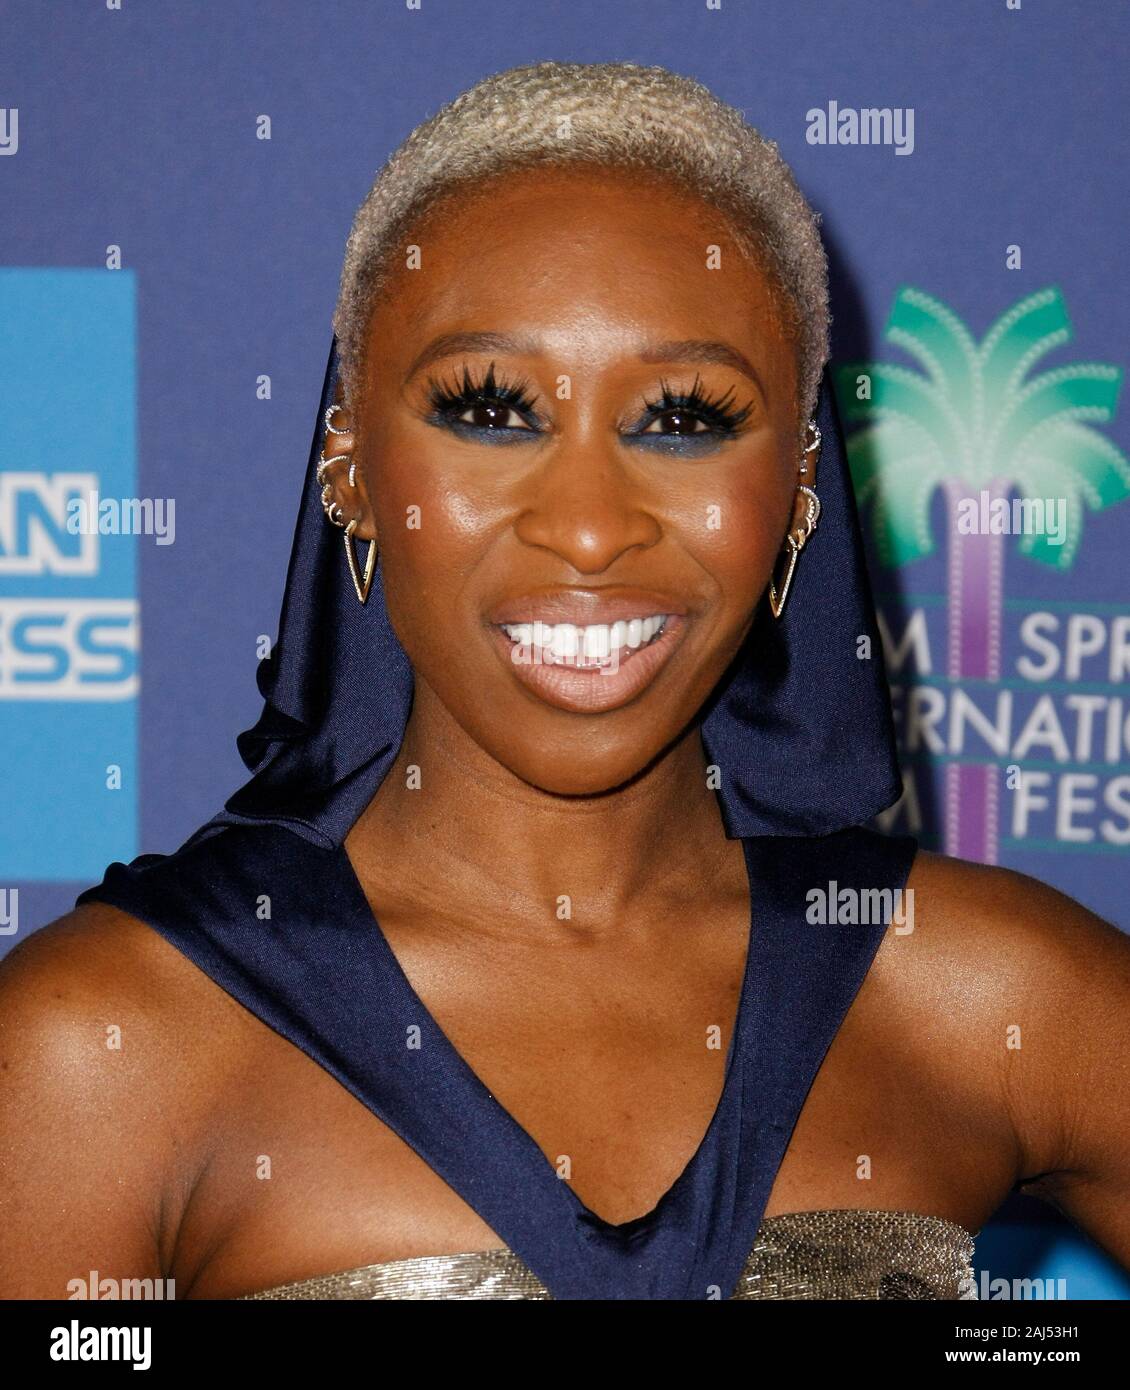 Palm Springs, California, USA. 2nd January, 2020. Cynthia Erivo attends the 31st Annual Palm Springs International Film Festival Film Awards Gala at Palm Springs Convention Center on January 02, 2020 in Palm Springs, California. Photo: CraSH/imageSPACE/MediaPunch Credit: MediaPunch Inc/Alamy Live News Stock Photo